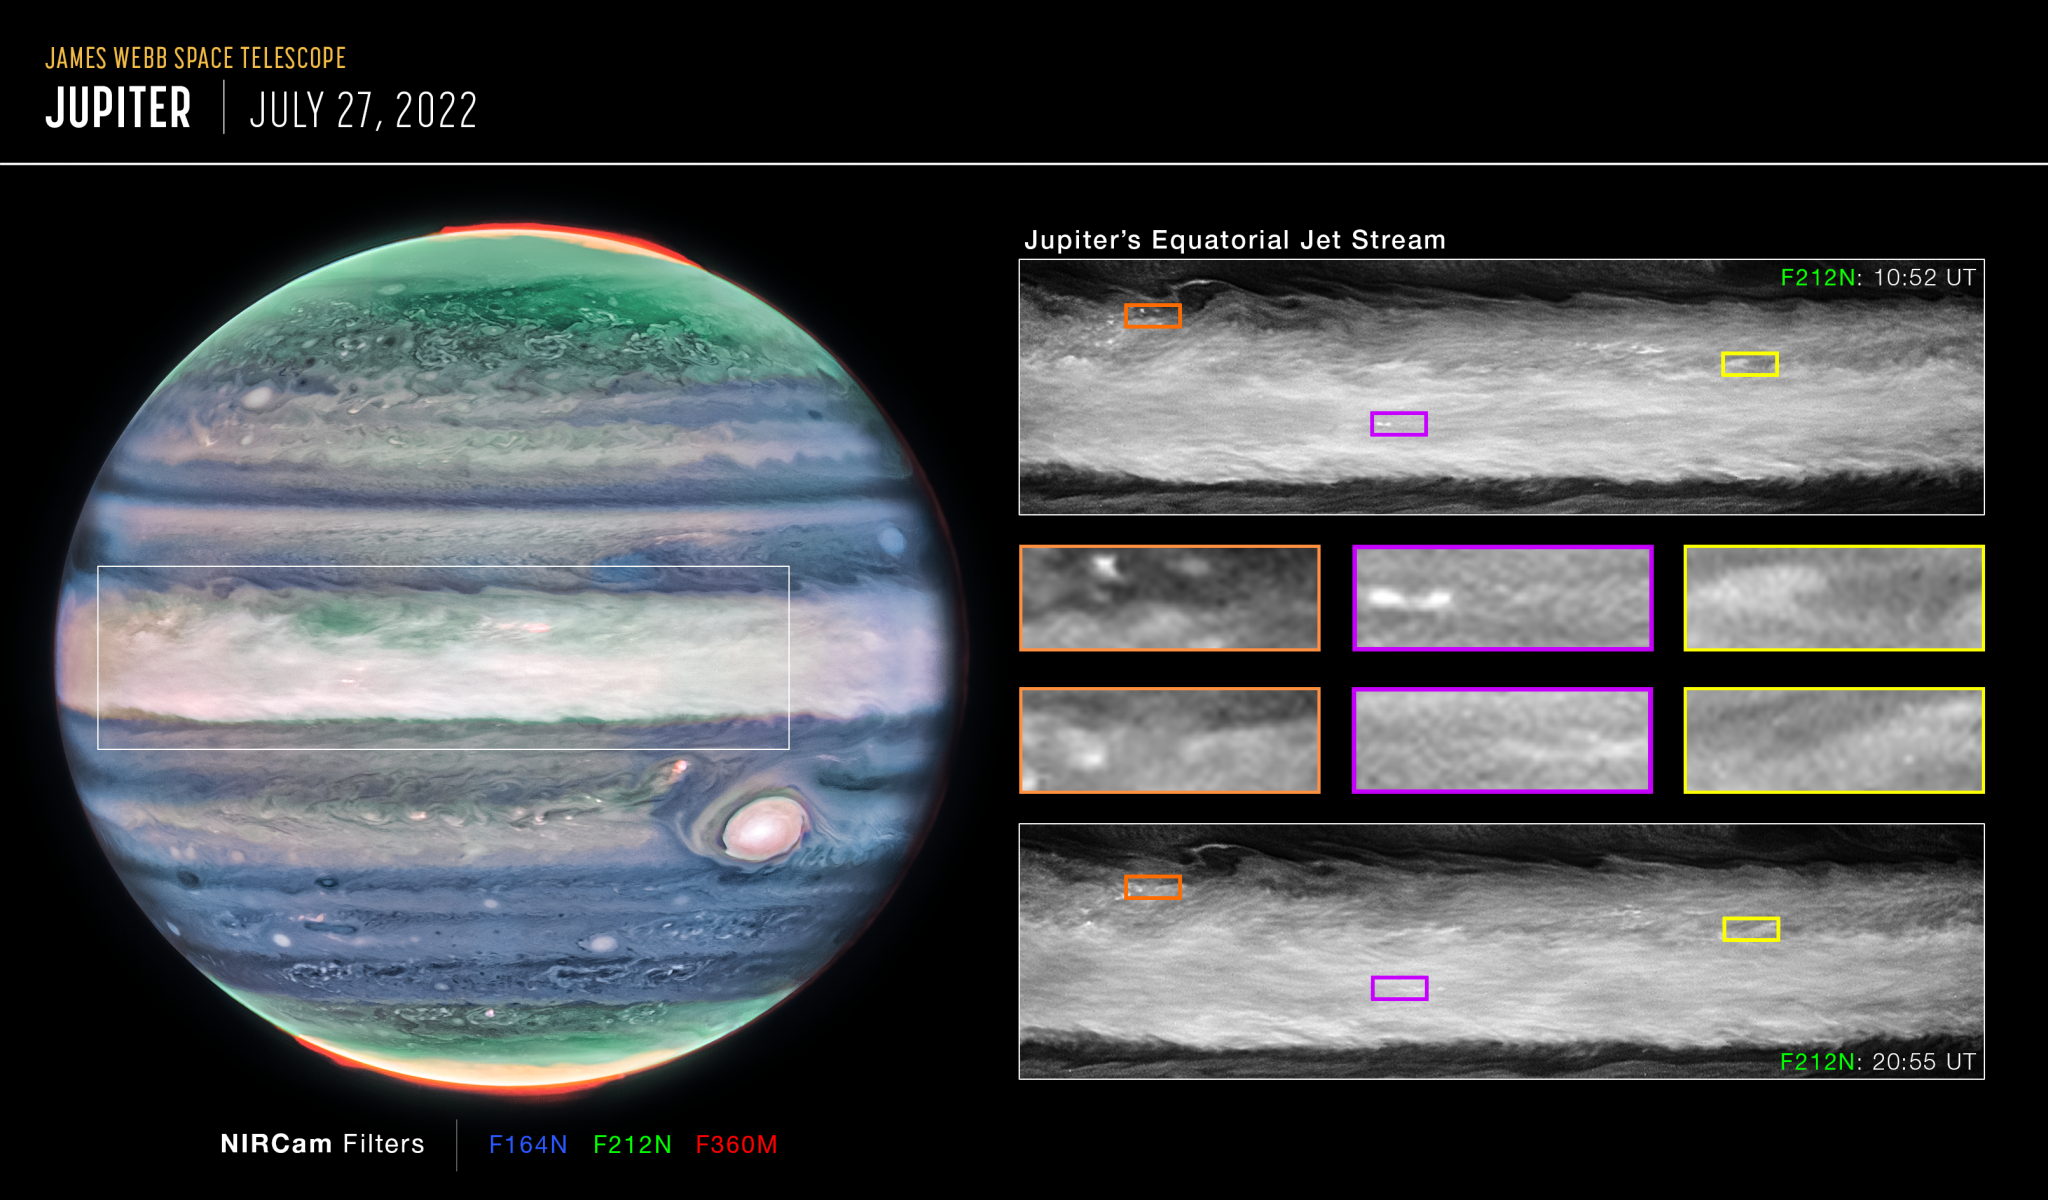 The infographic shows Webb’s image of Jupiter at the left. The planet is striated with swirling horizontal stripes of neon turquoise, periwinkle, and cream. Below the planet, the NIRCam filters and their respective colors assigned are listed – F164N in blue, F212N in green, and F360M in red. On the right side of the infographic, there are 8 separate images. Two of those images are horizontal and span the entire right half of the infographic. The top horizontal image is labeled F212N 10:52 UT and the bottom is labeled F212N 20:55 UT. They are zoomed-in pullouts from a section of Jupiter’s equator—outlined in a white box on the image of the planet on the left. Both of these images are white and grey with horizontal wispy clouds. There are 6 smaller boxes in between the two horizontal images—3 rows of 2. The first column of the boxes is outlined in orange, the second column purple and the third yellow. Each of the smaller images correspond to orange, purple, and yellow boxes placed along the horizontal images.